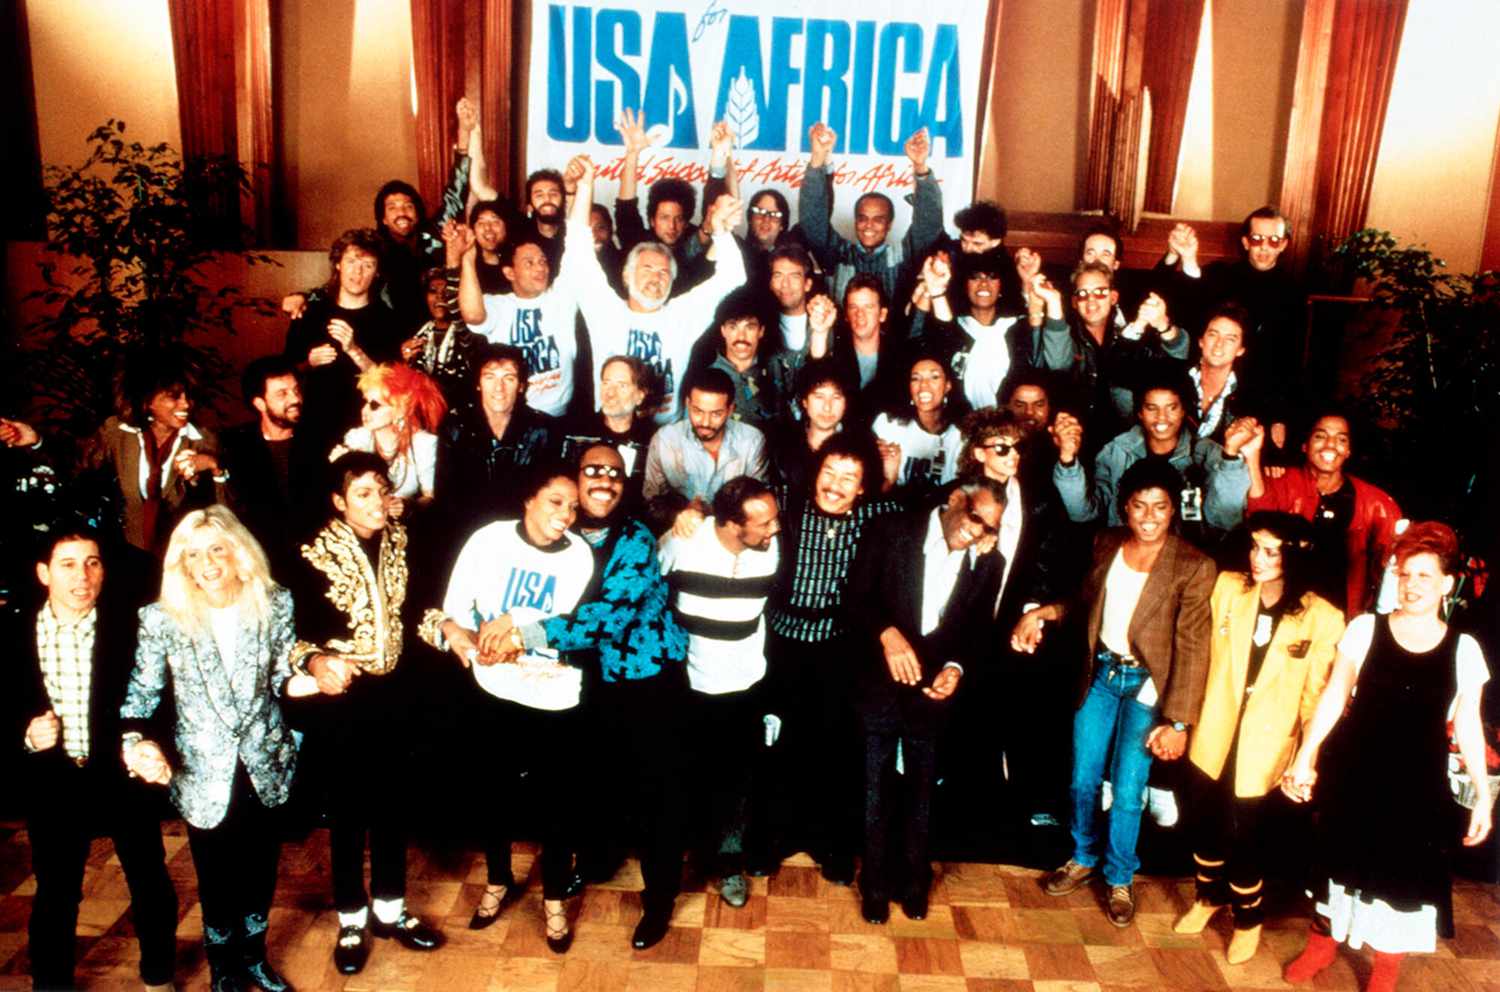 USA FOR AFRICA: WE ARE THE WORLD (video), 1985